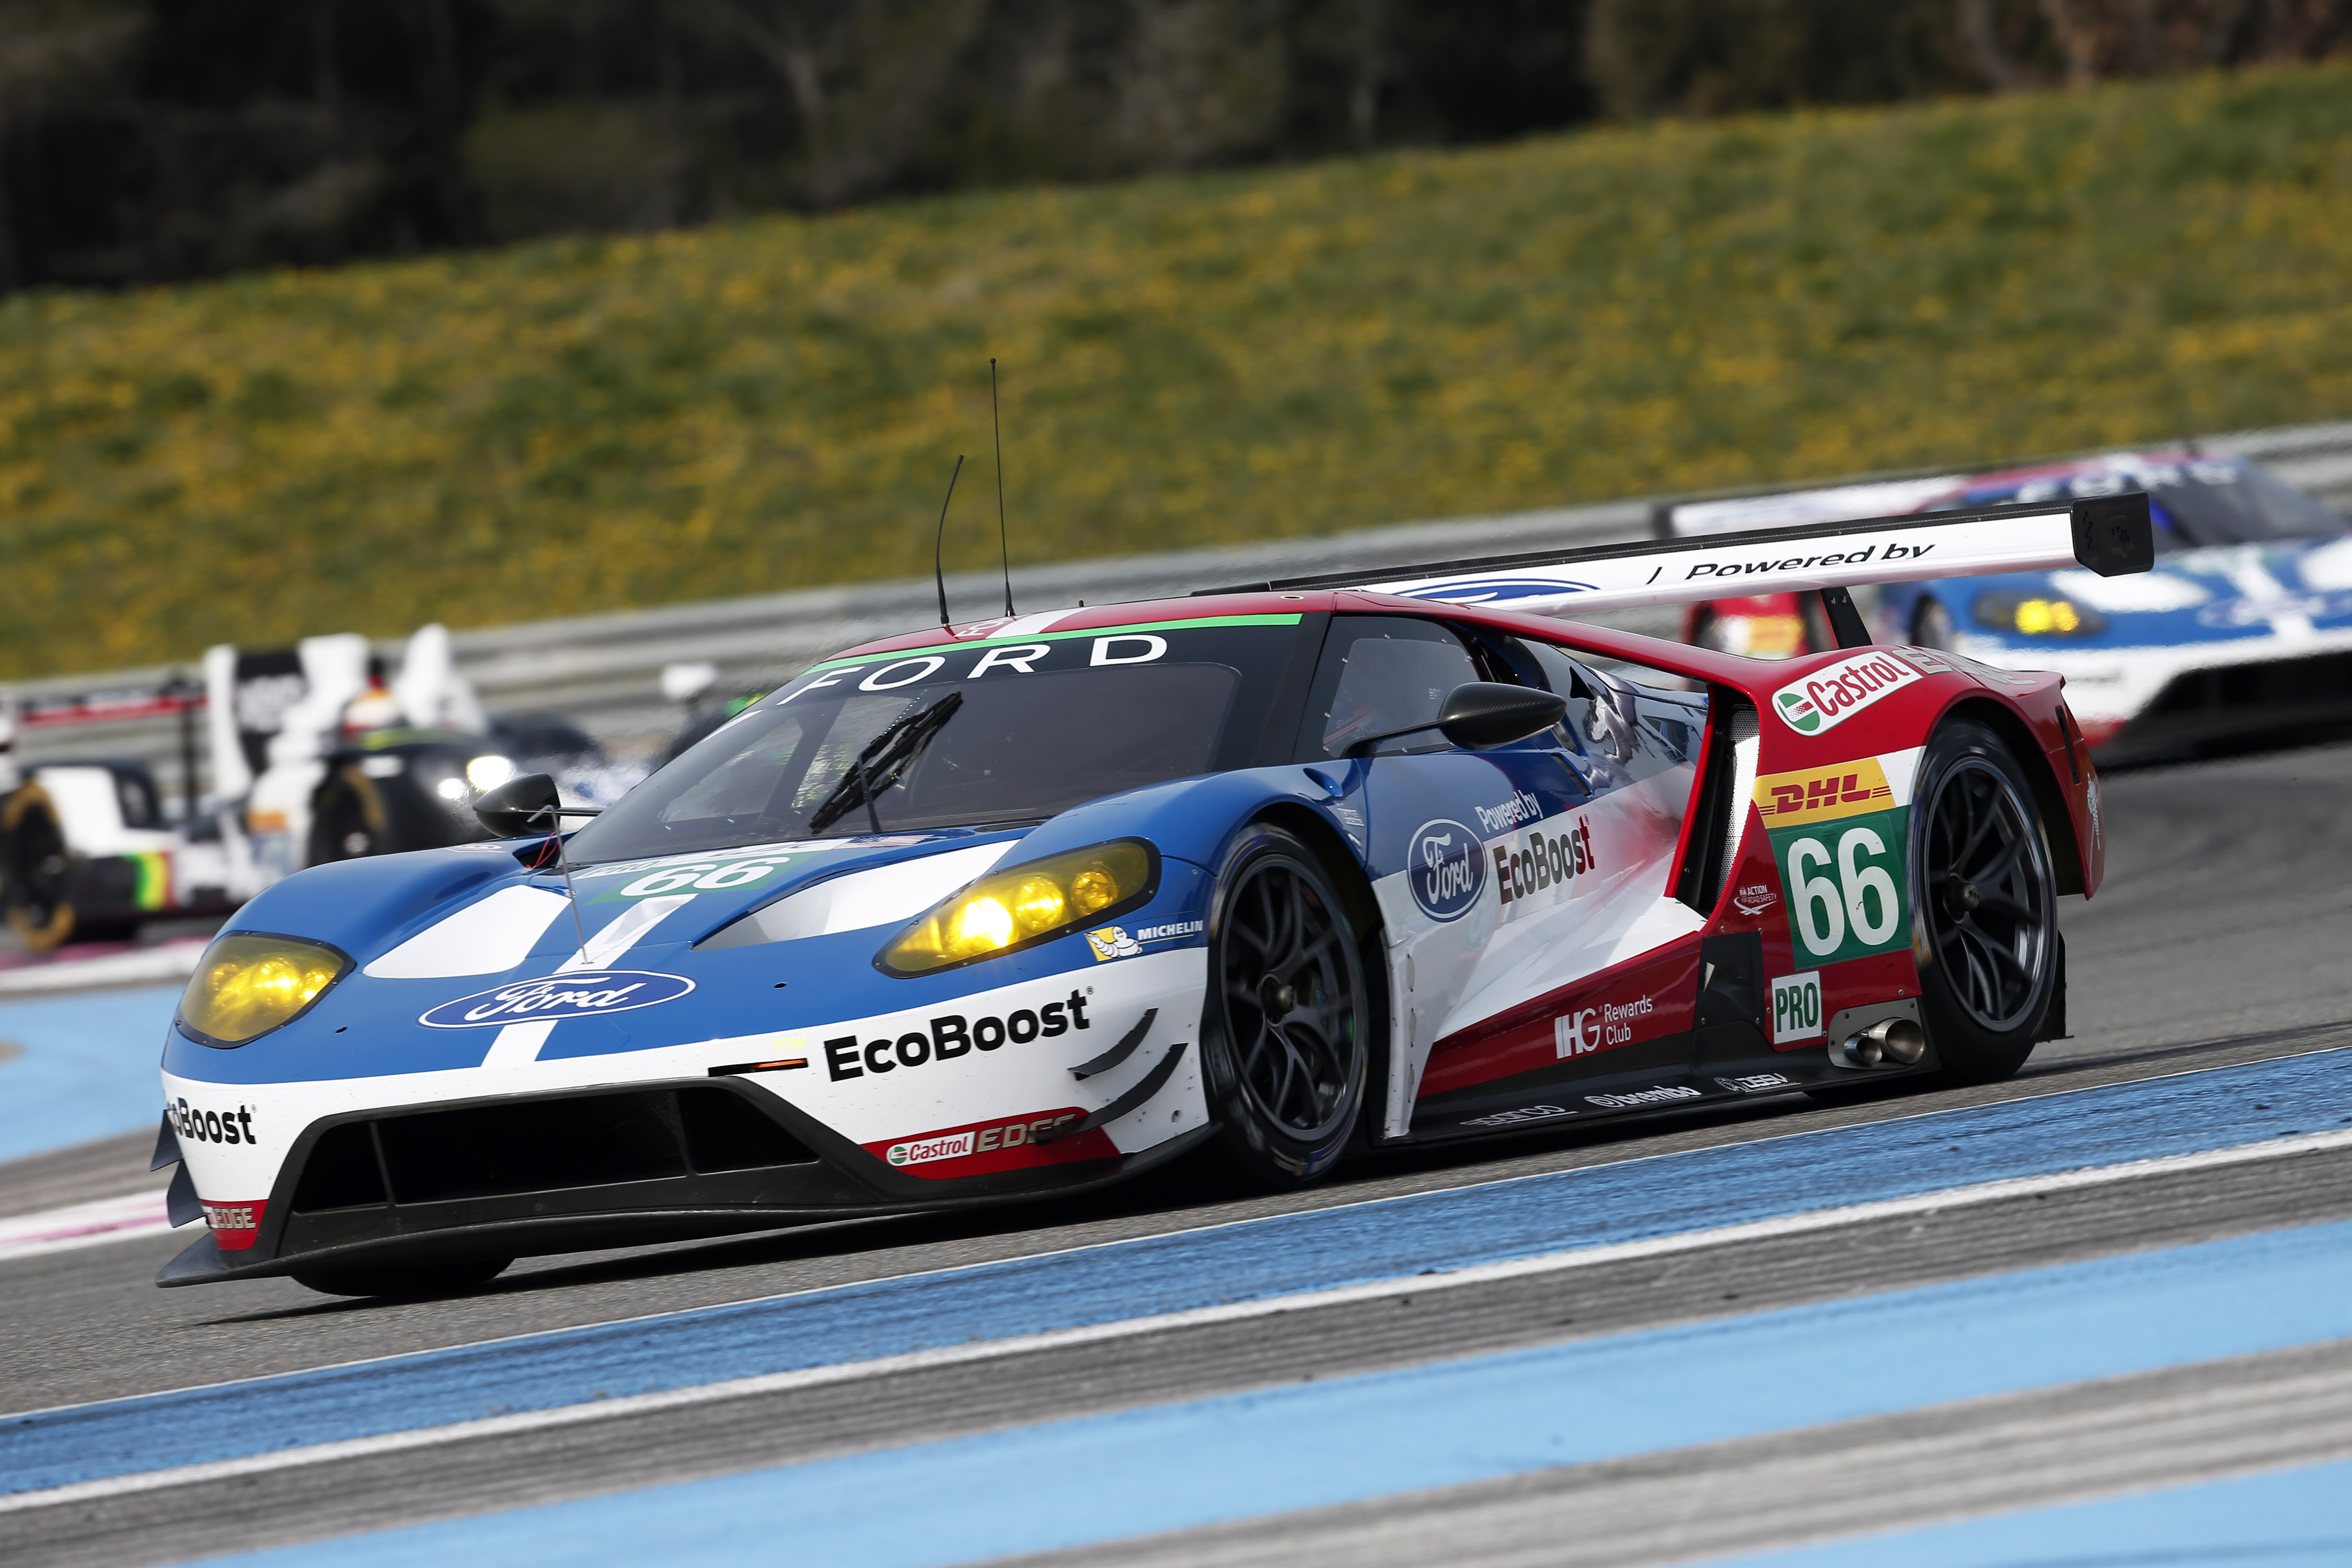 66 FRANCHITTI Marino (gbr) MUCKE Stefan (deu) Ford GT team Ford Chip Ganassi UK action during the 2016 FIA WEC World Endurance Championship prologue tests at Paul Ricard HTTT, Le Castellet France, March 24 to 26 2016 - Photo DPPI / Jean Michel Le Meur.